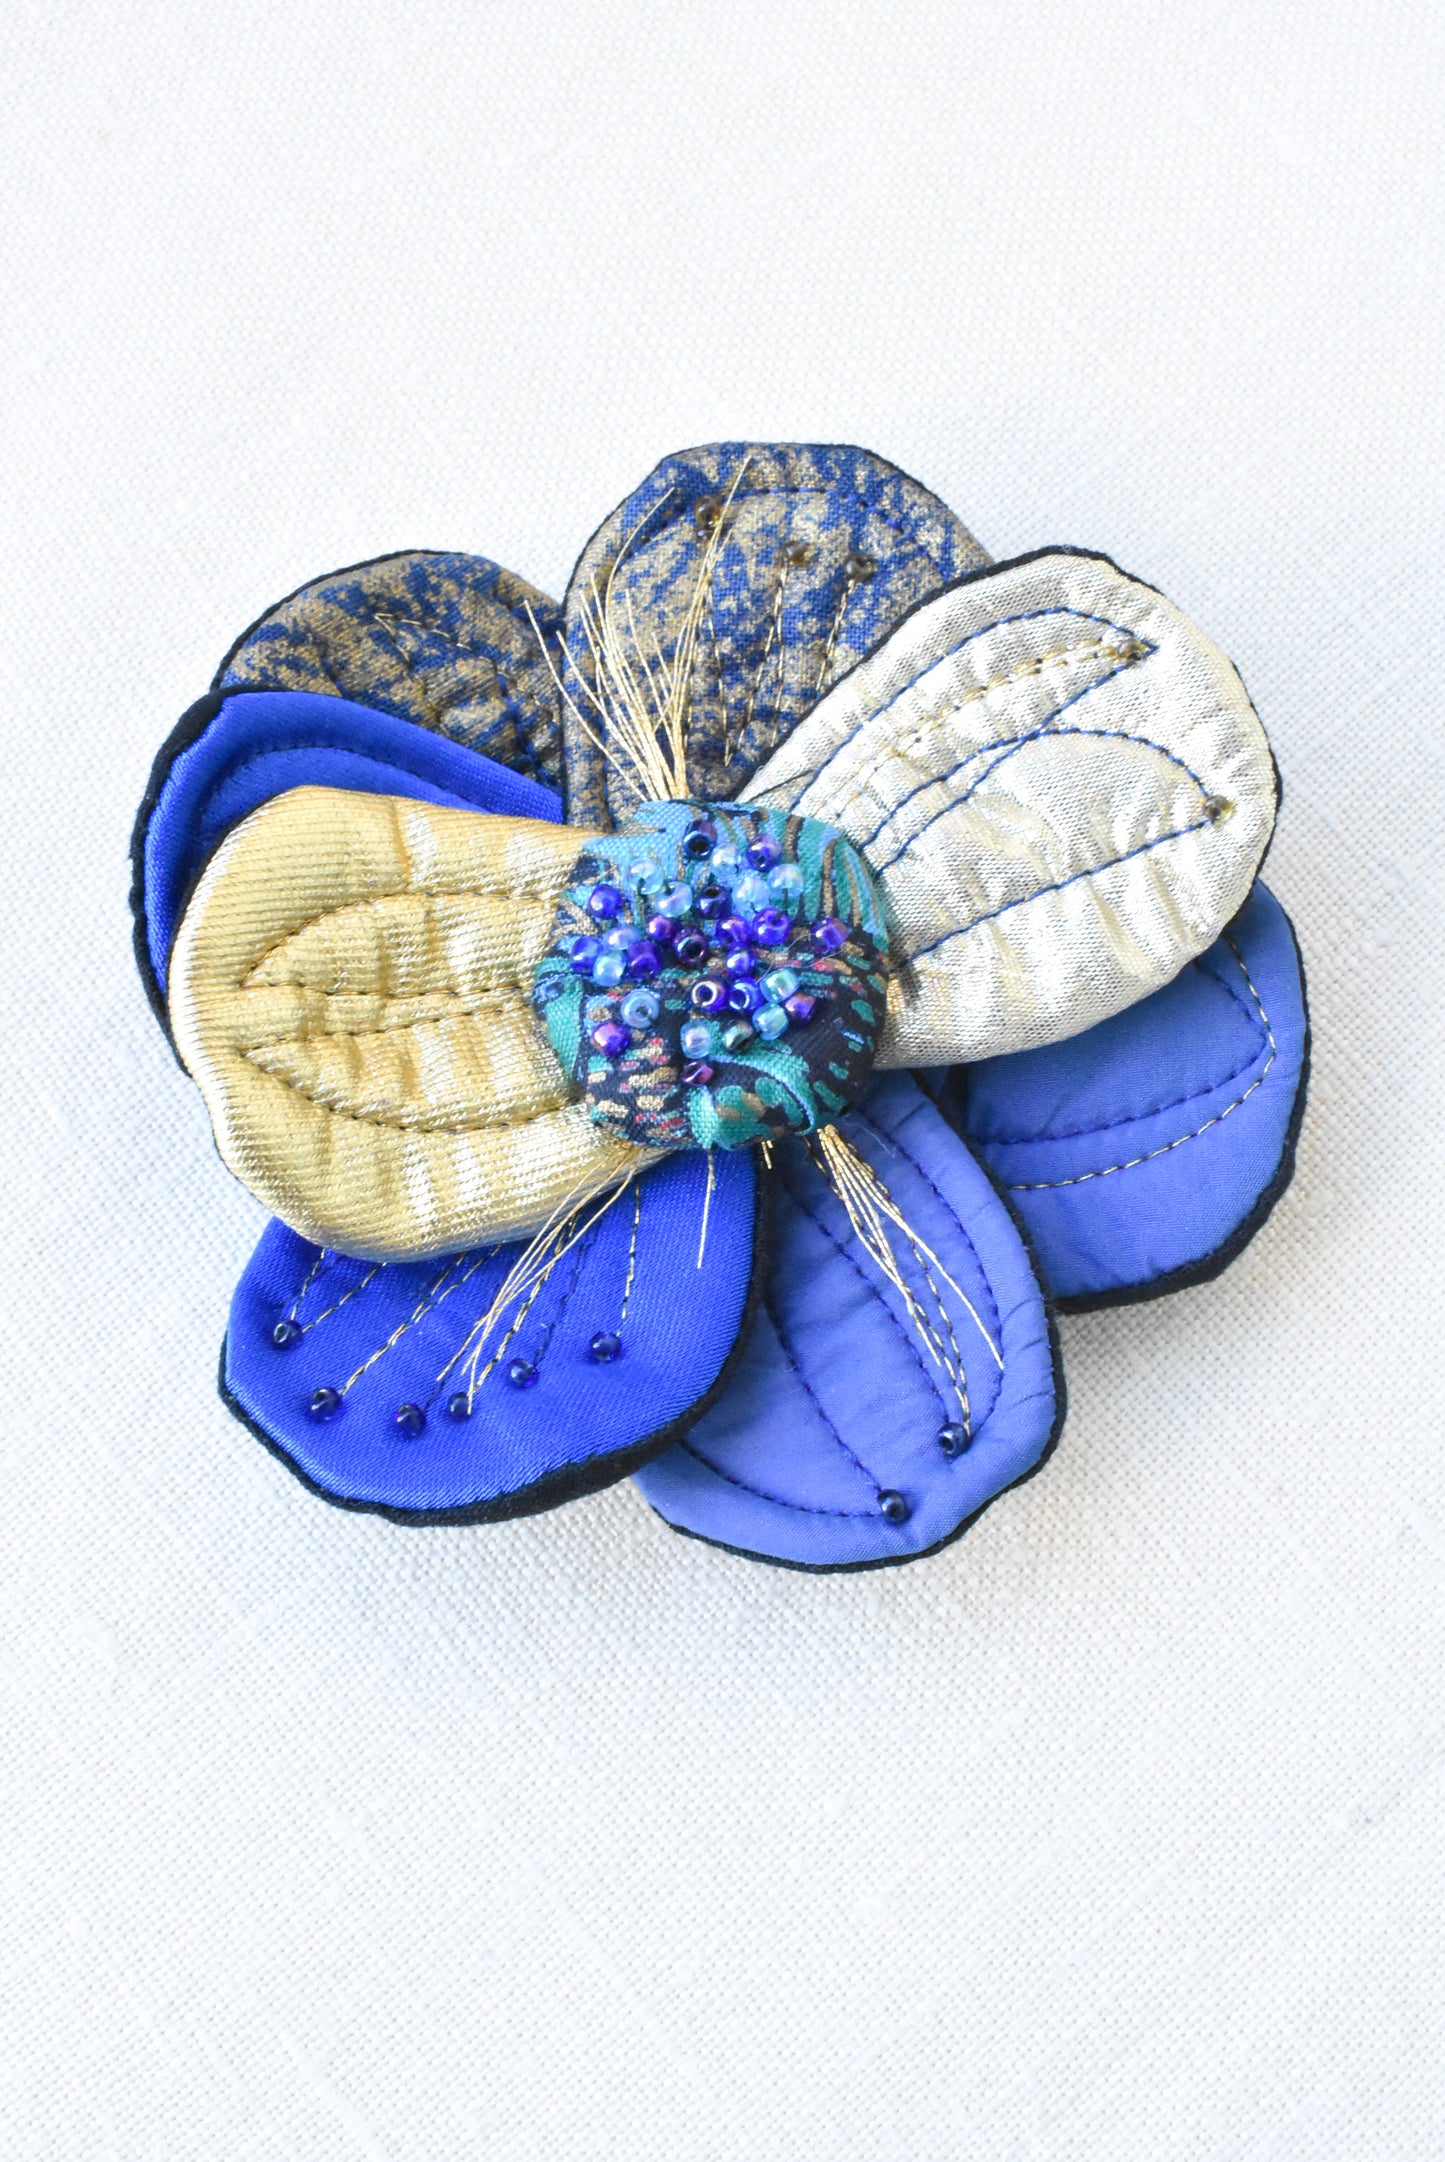 Large blue/gold fabric flower brooch